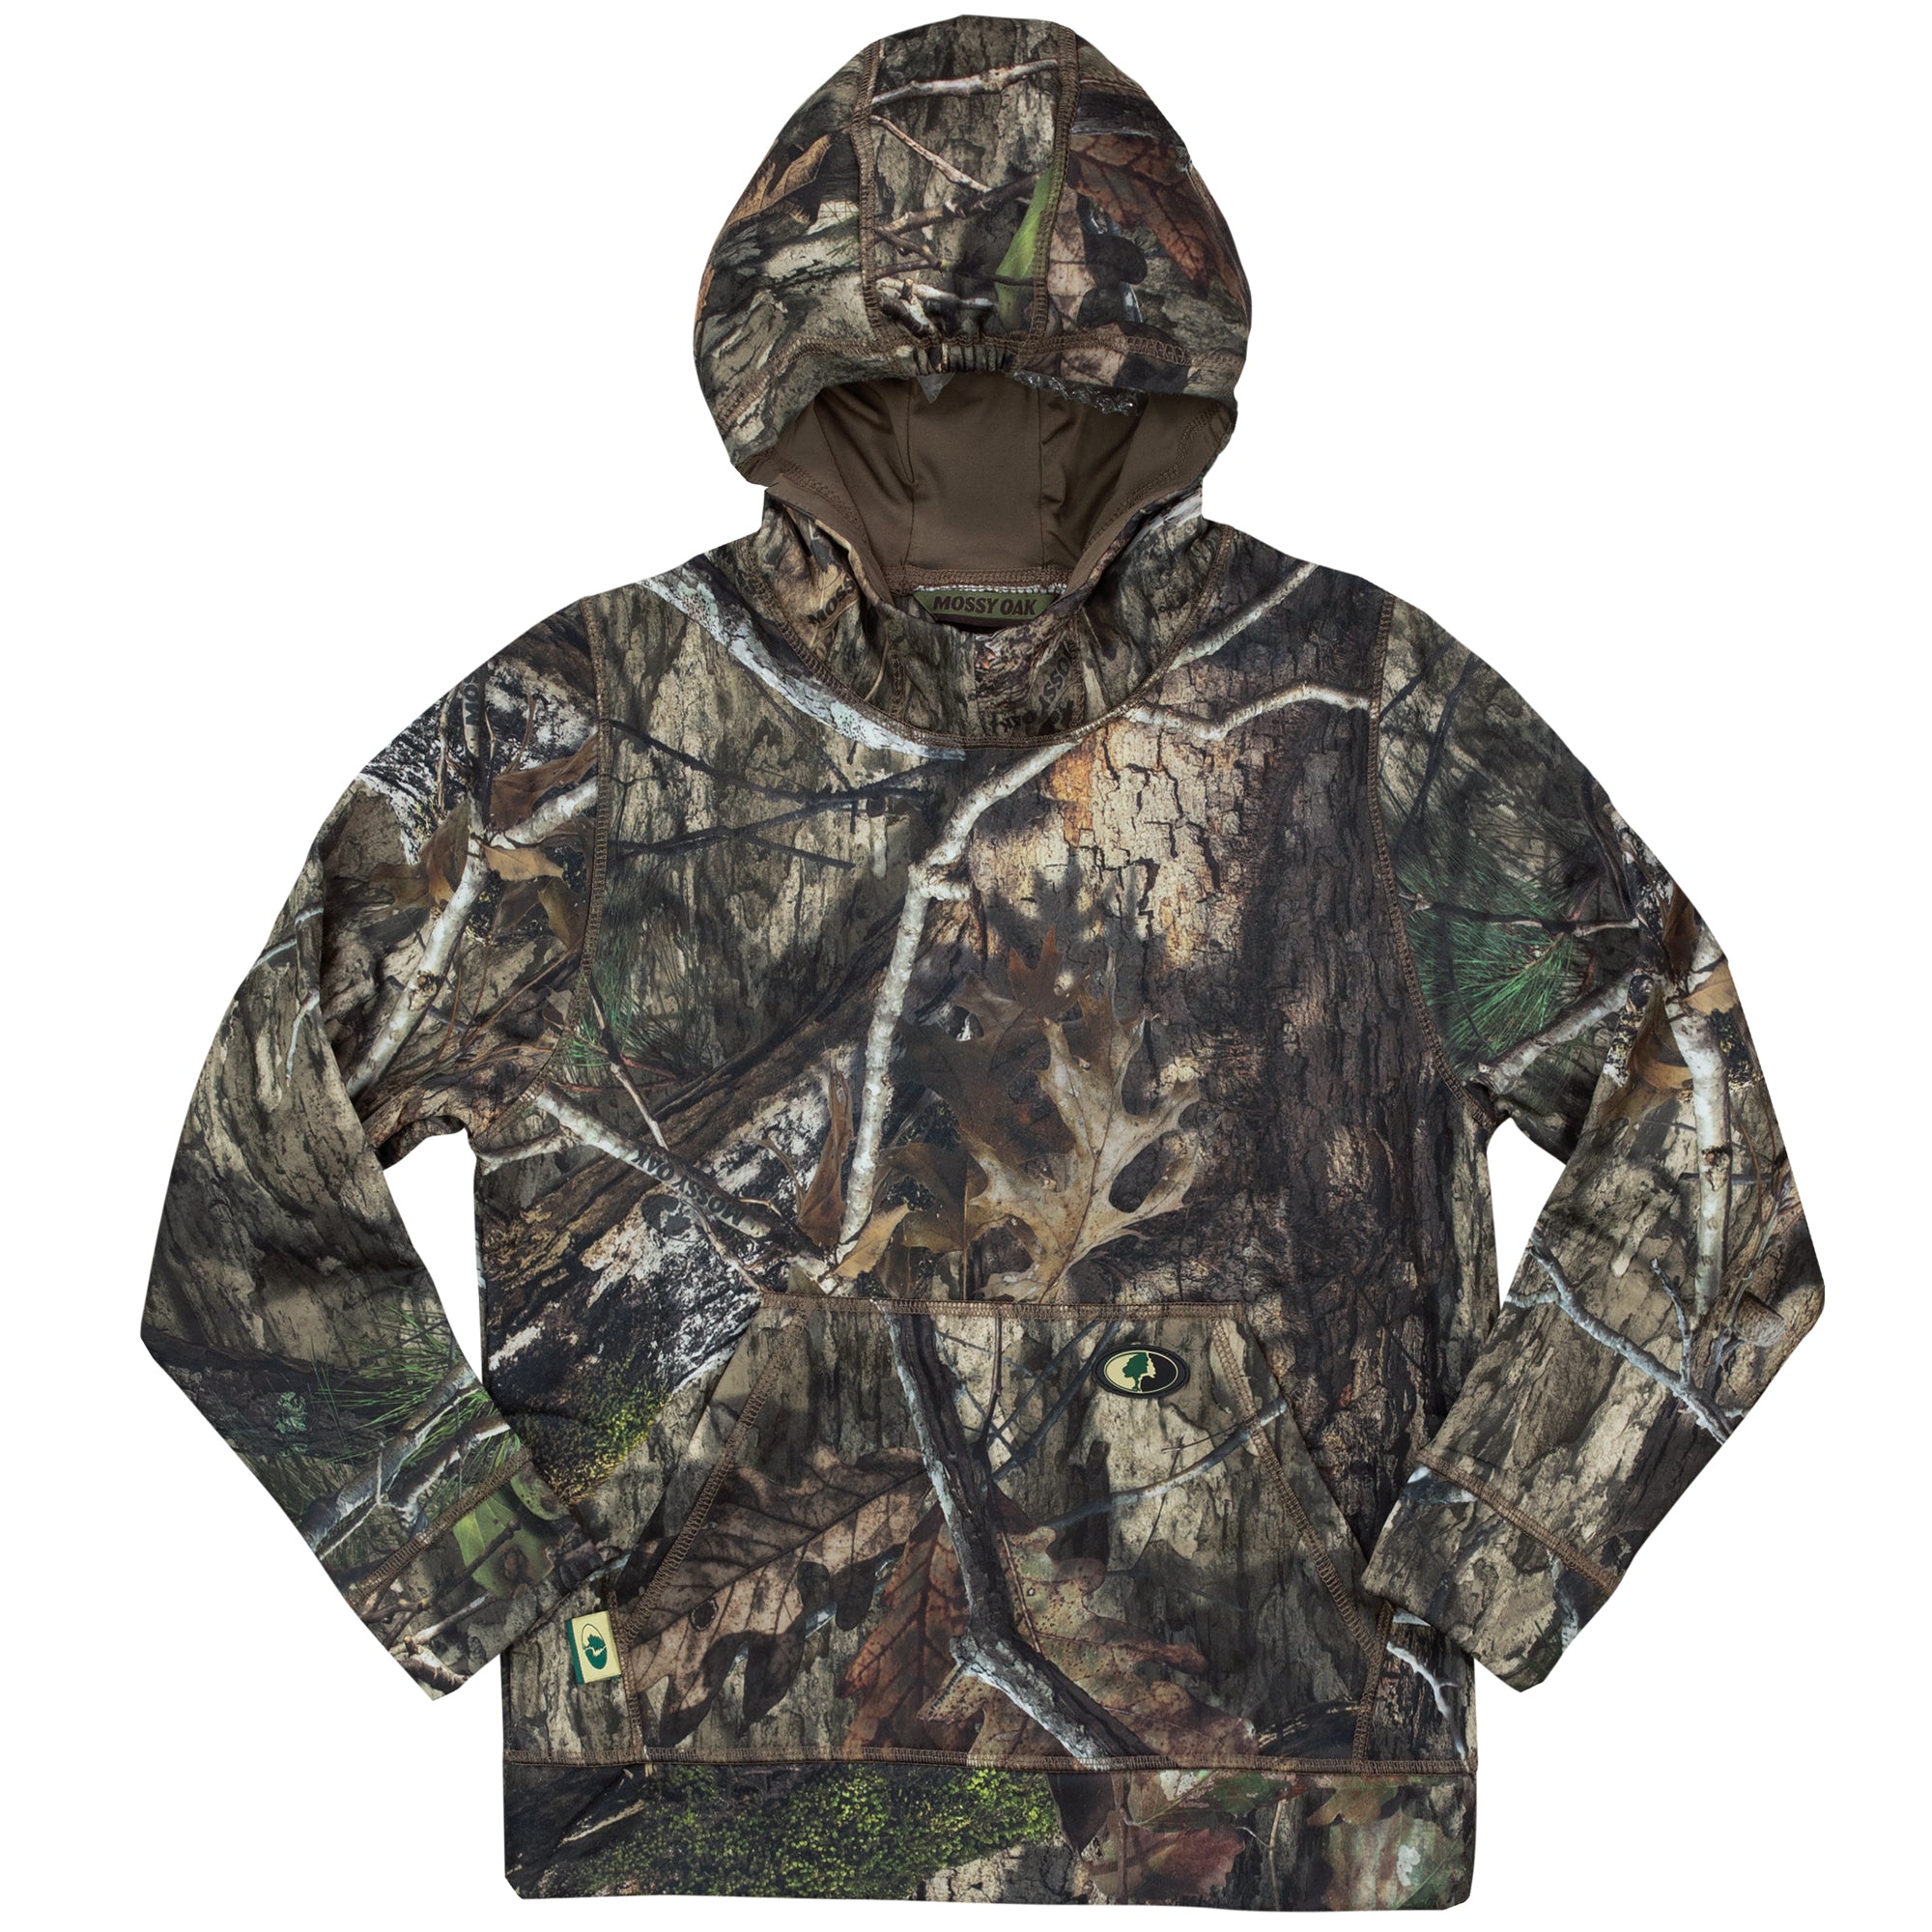 😍 Special offer: $13.47 Mossy Oak Casual Performance Crews